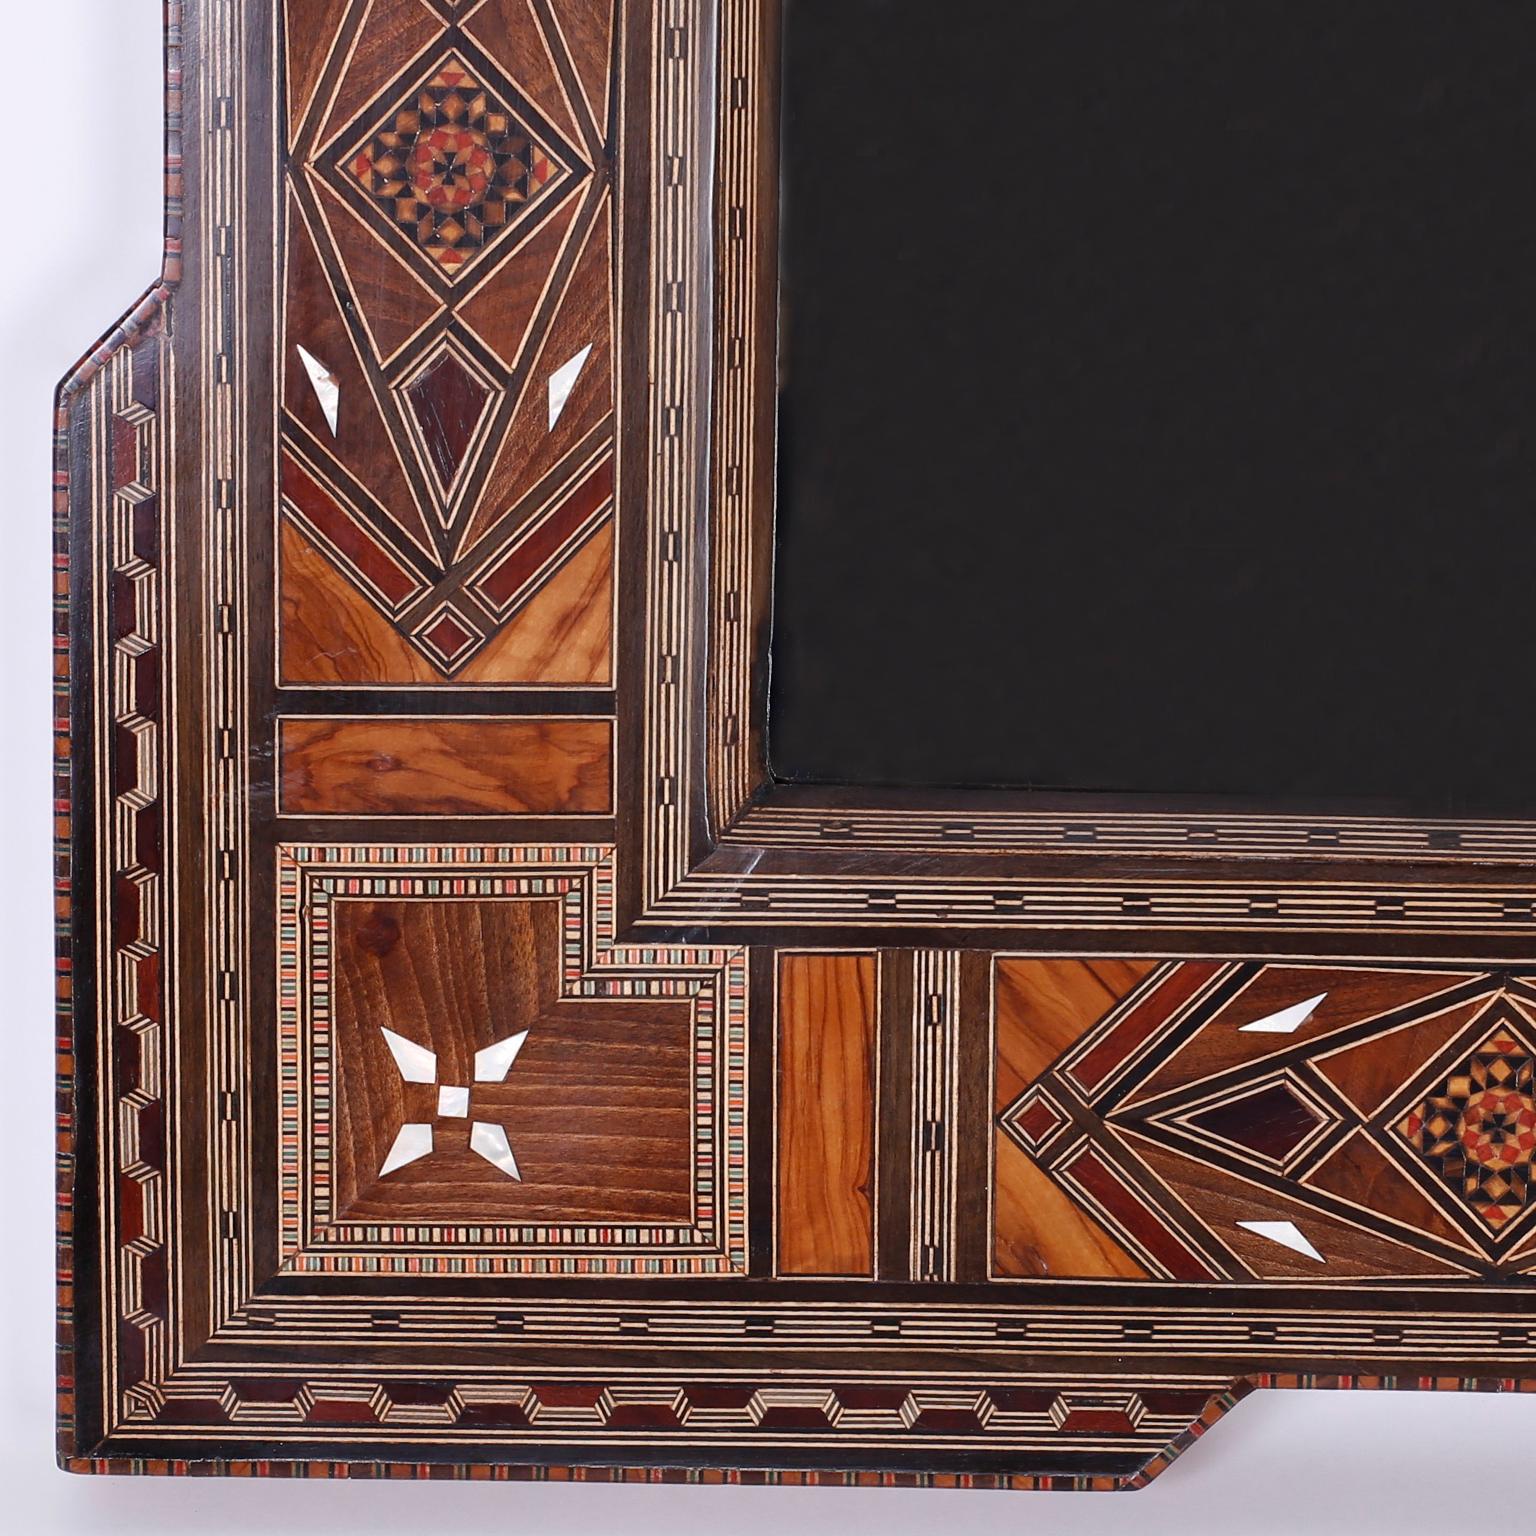 Inspired Syrian mirror and frame ambitiously inlaid with walnut, mahogany, ebony bone, dyed wood, marquetry, and mother-of-pearl in ubiquitous symbolic geometric designs, in the Moorish manner.